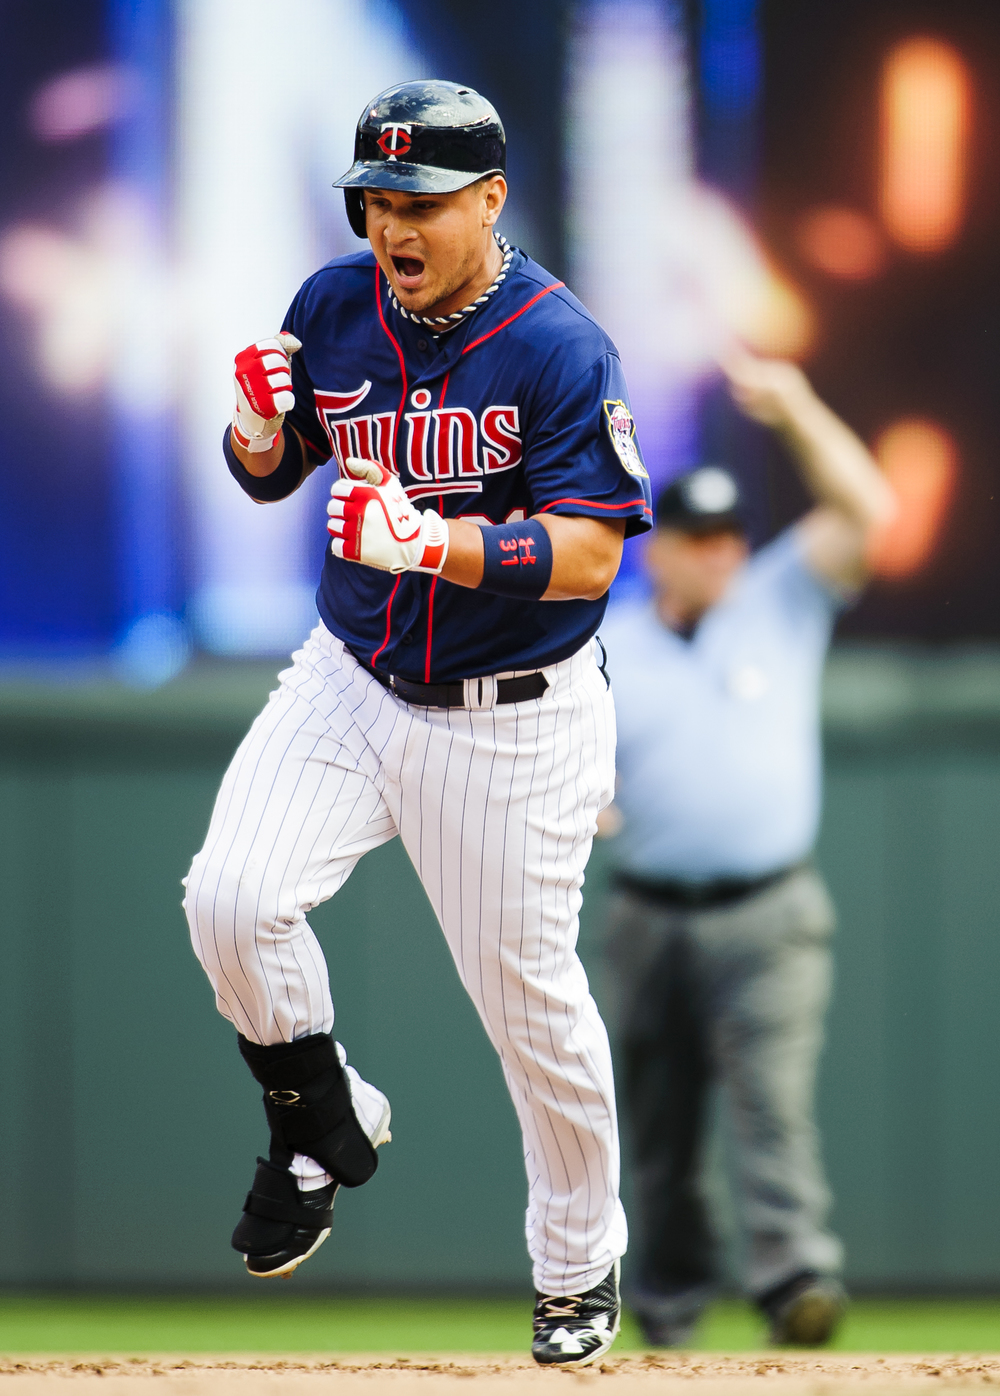  Oswaldo Arcia #31 of the Minnesota Twins celebrates as he rounds the bases as second base umpire Bob Davidson #61 signals a home run during the seventh inning of the game between the Minnesota Twins and the Houston Astros on August 4, 2013 at Target